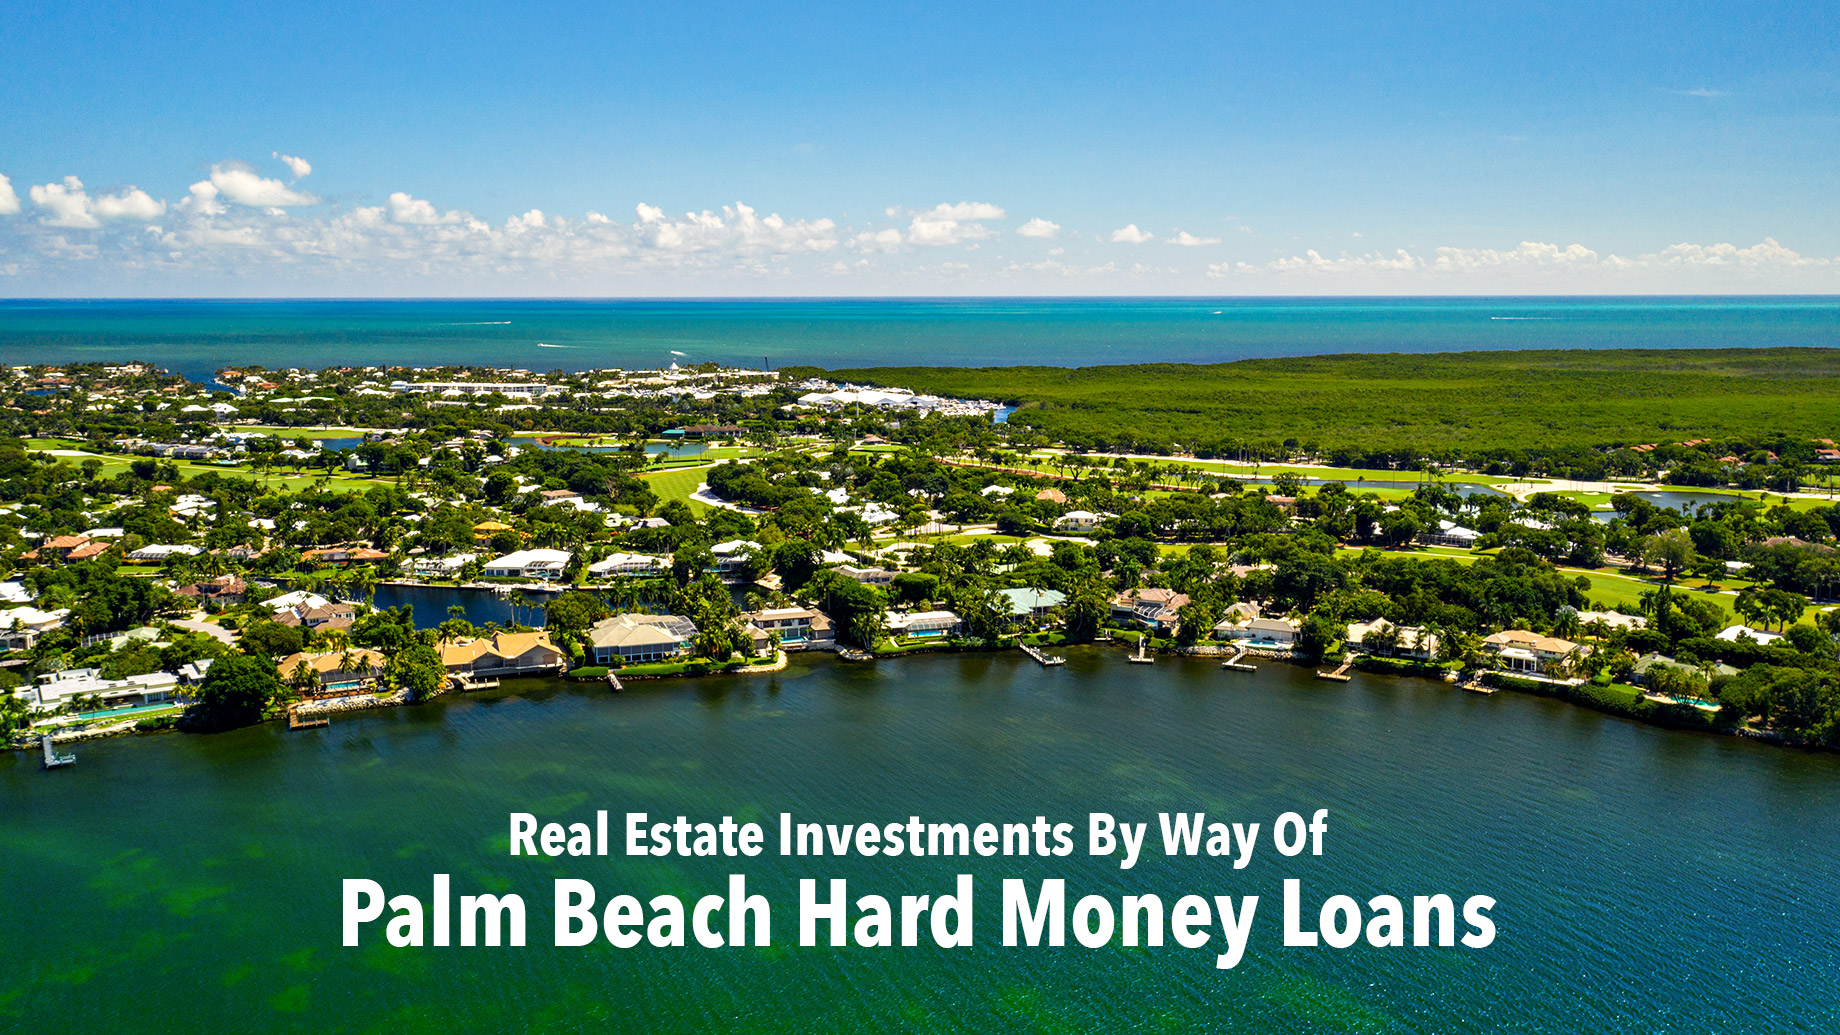 Real Estate Investments By Way Of Palm Beach Hard Money Loans